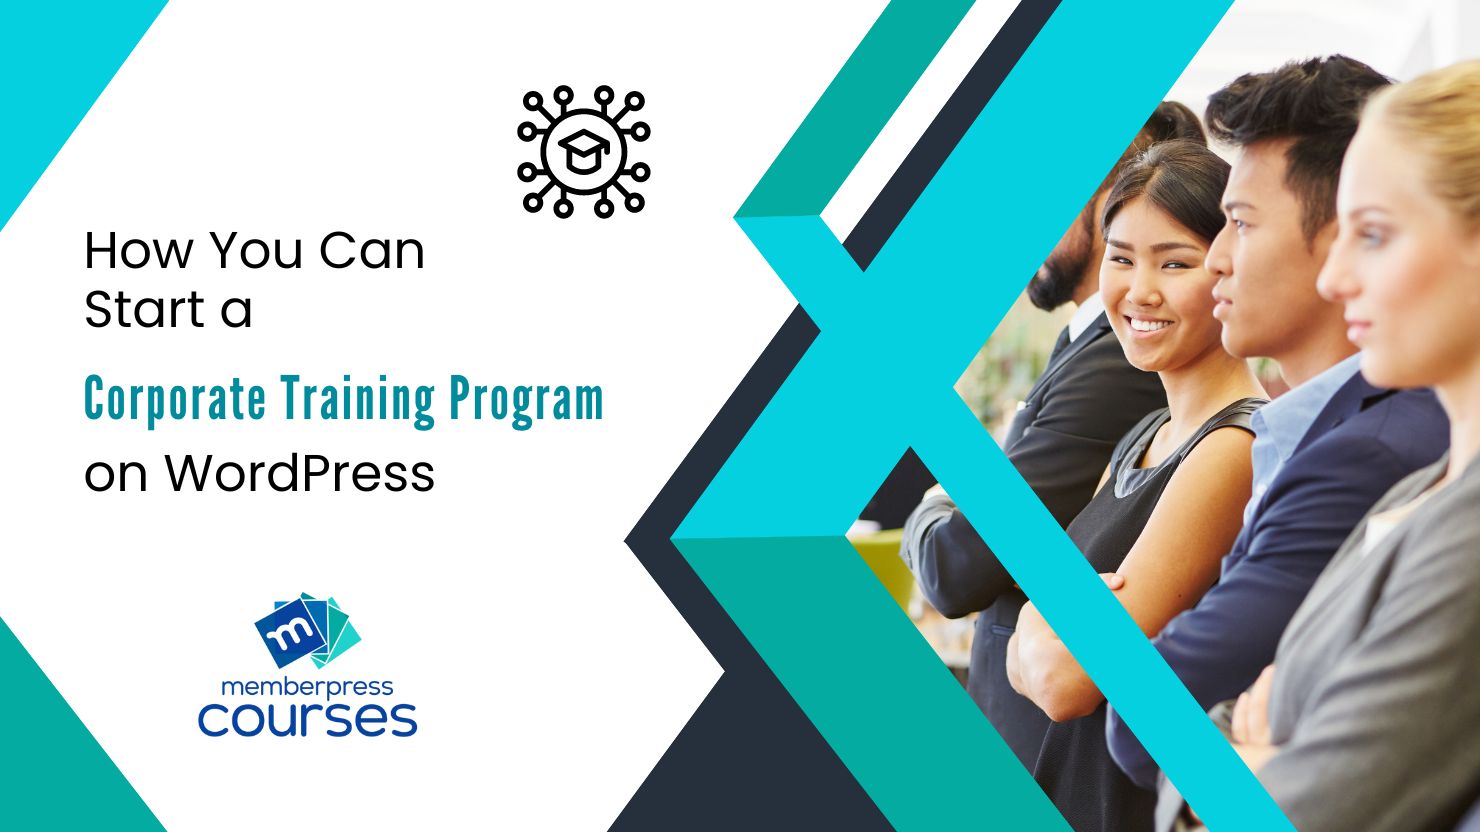 How to start a corporate training business with WordPress